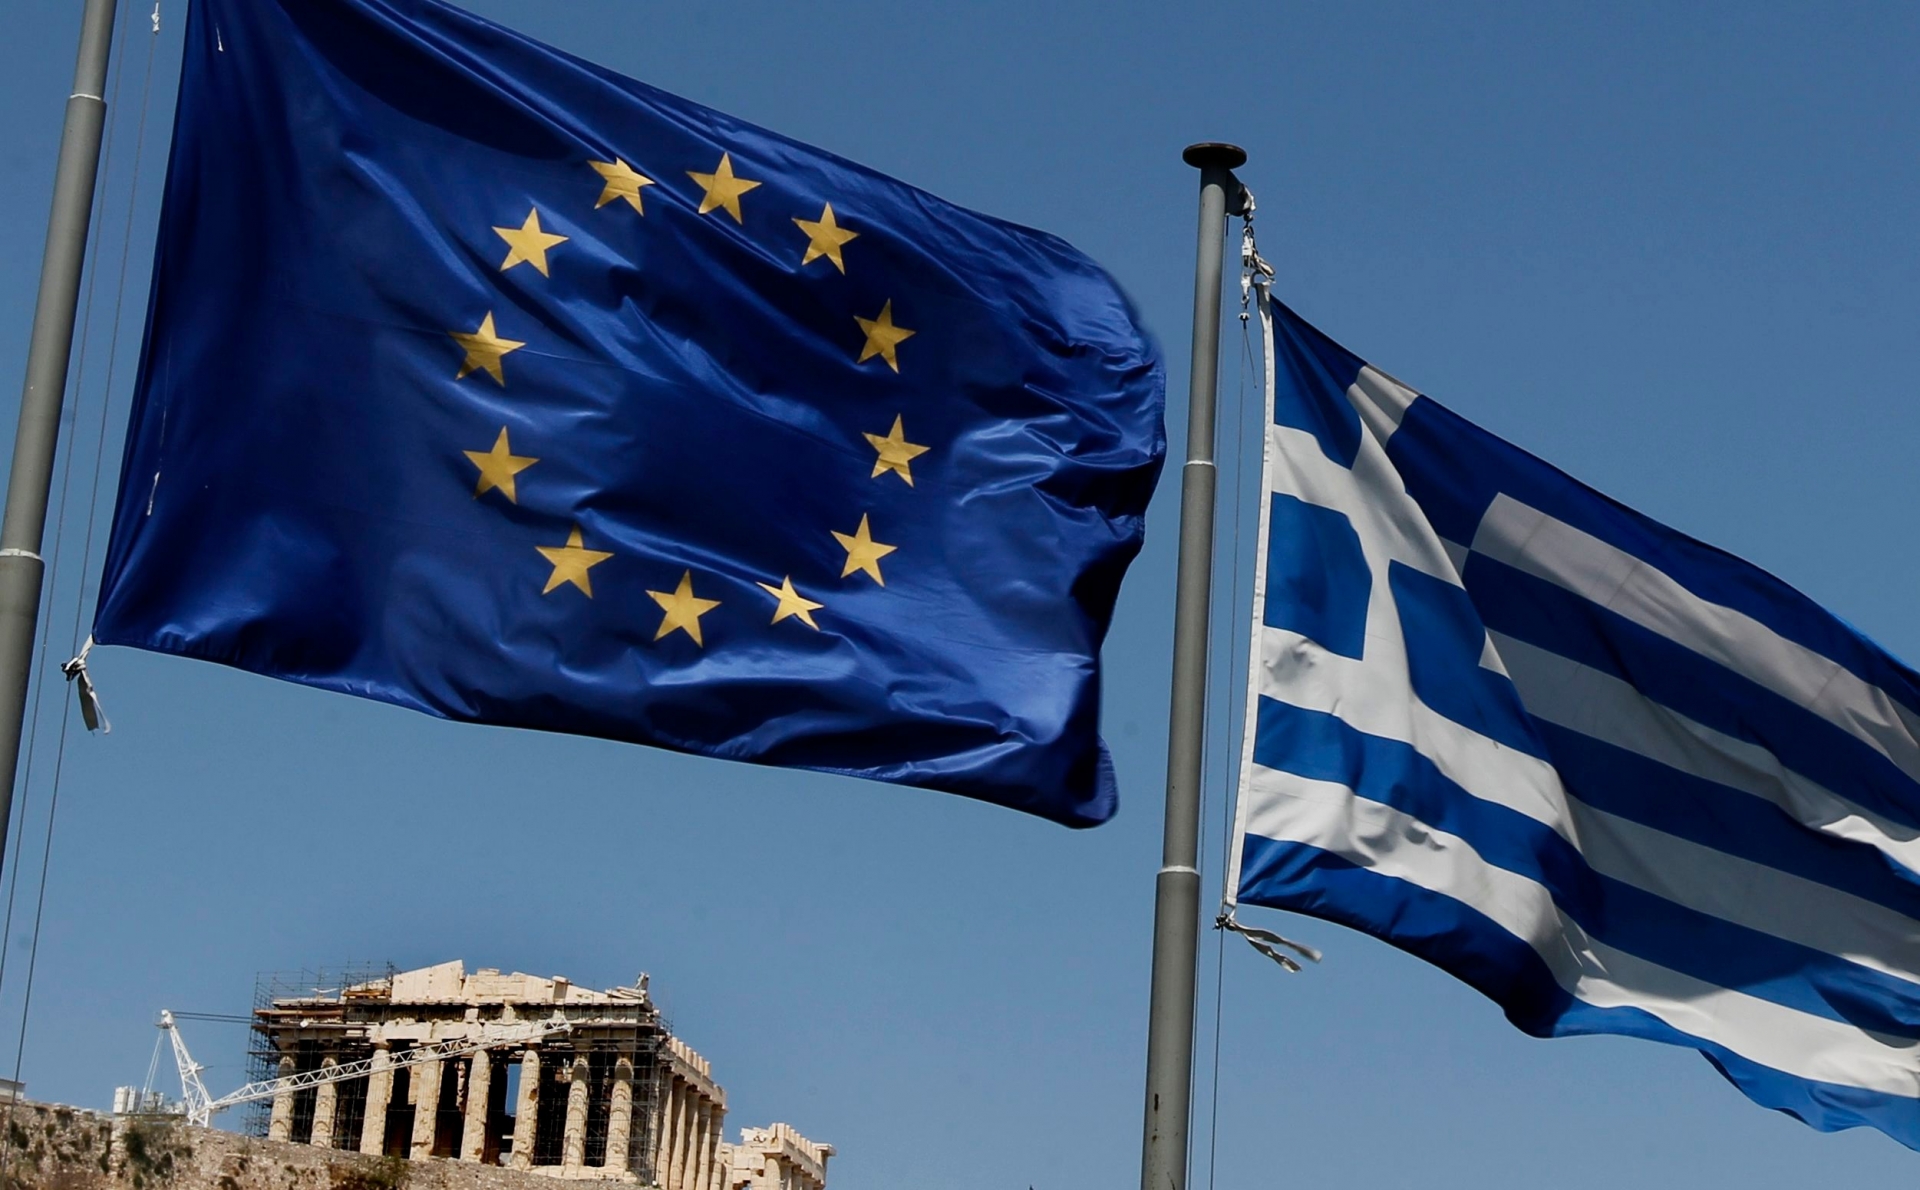 A European Union left and the Greek flag wave above the ancient Parthenon temple, at the Acropolis Hill, in Athens on Monday, July 11, 2011.Greece's Socialist government on Monday named a five-member committee to head a euro50 billion ($71.2 billion) privatization program aimed at easing the country's euro340 billion ($484.2 billion) national debt. (AP Photo/Petros Giannakouris) Greece Financial Crisis